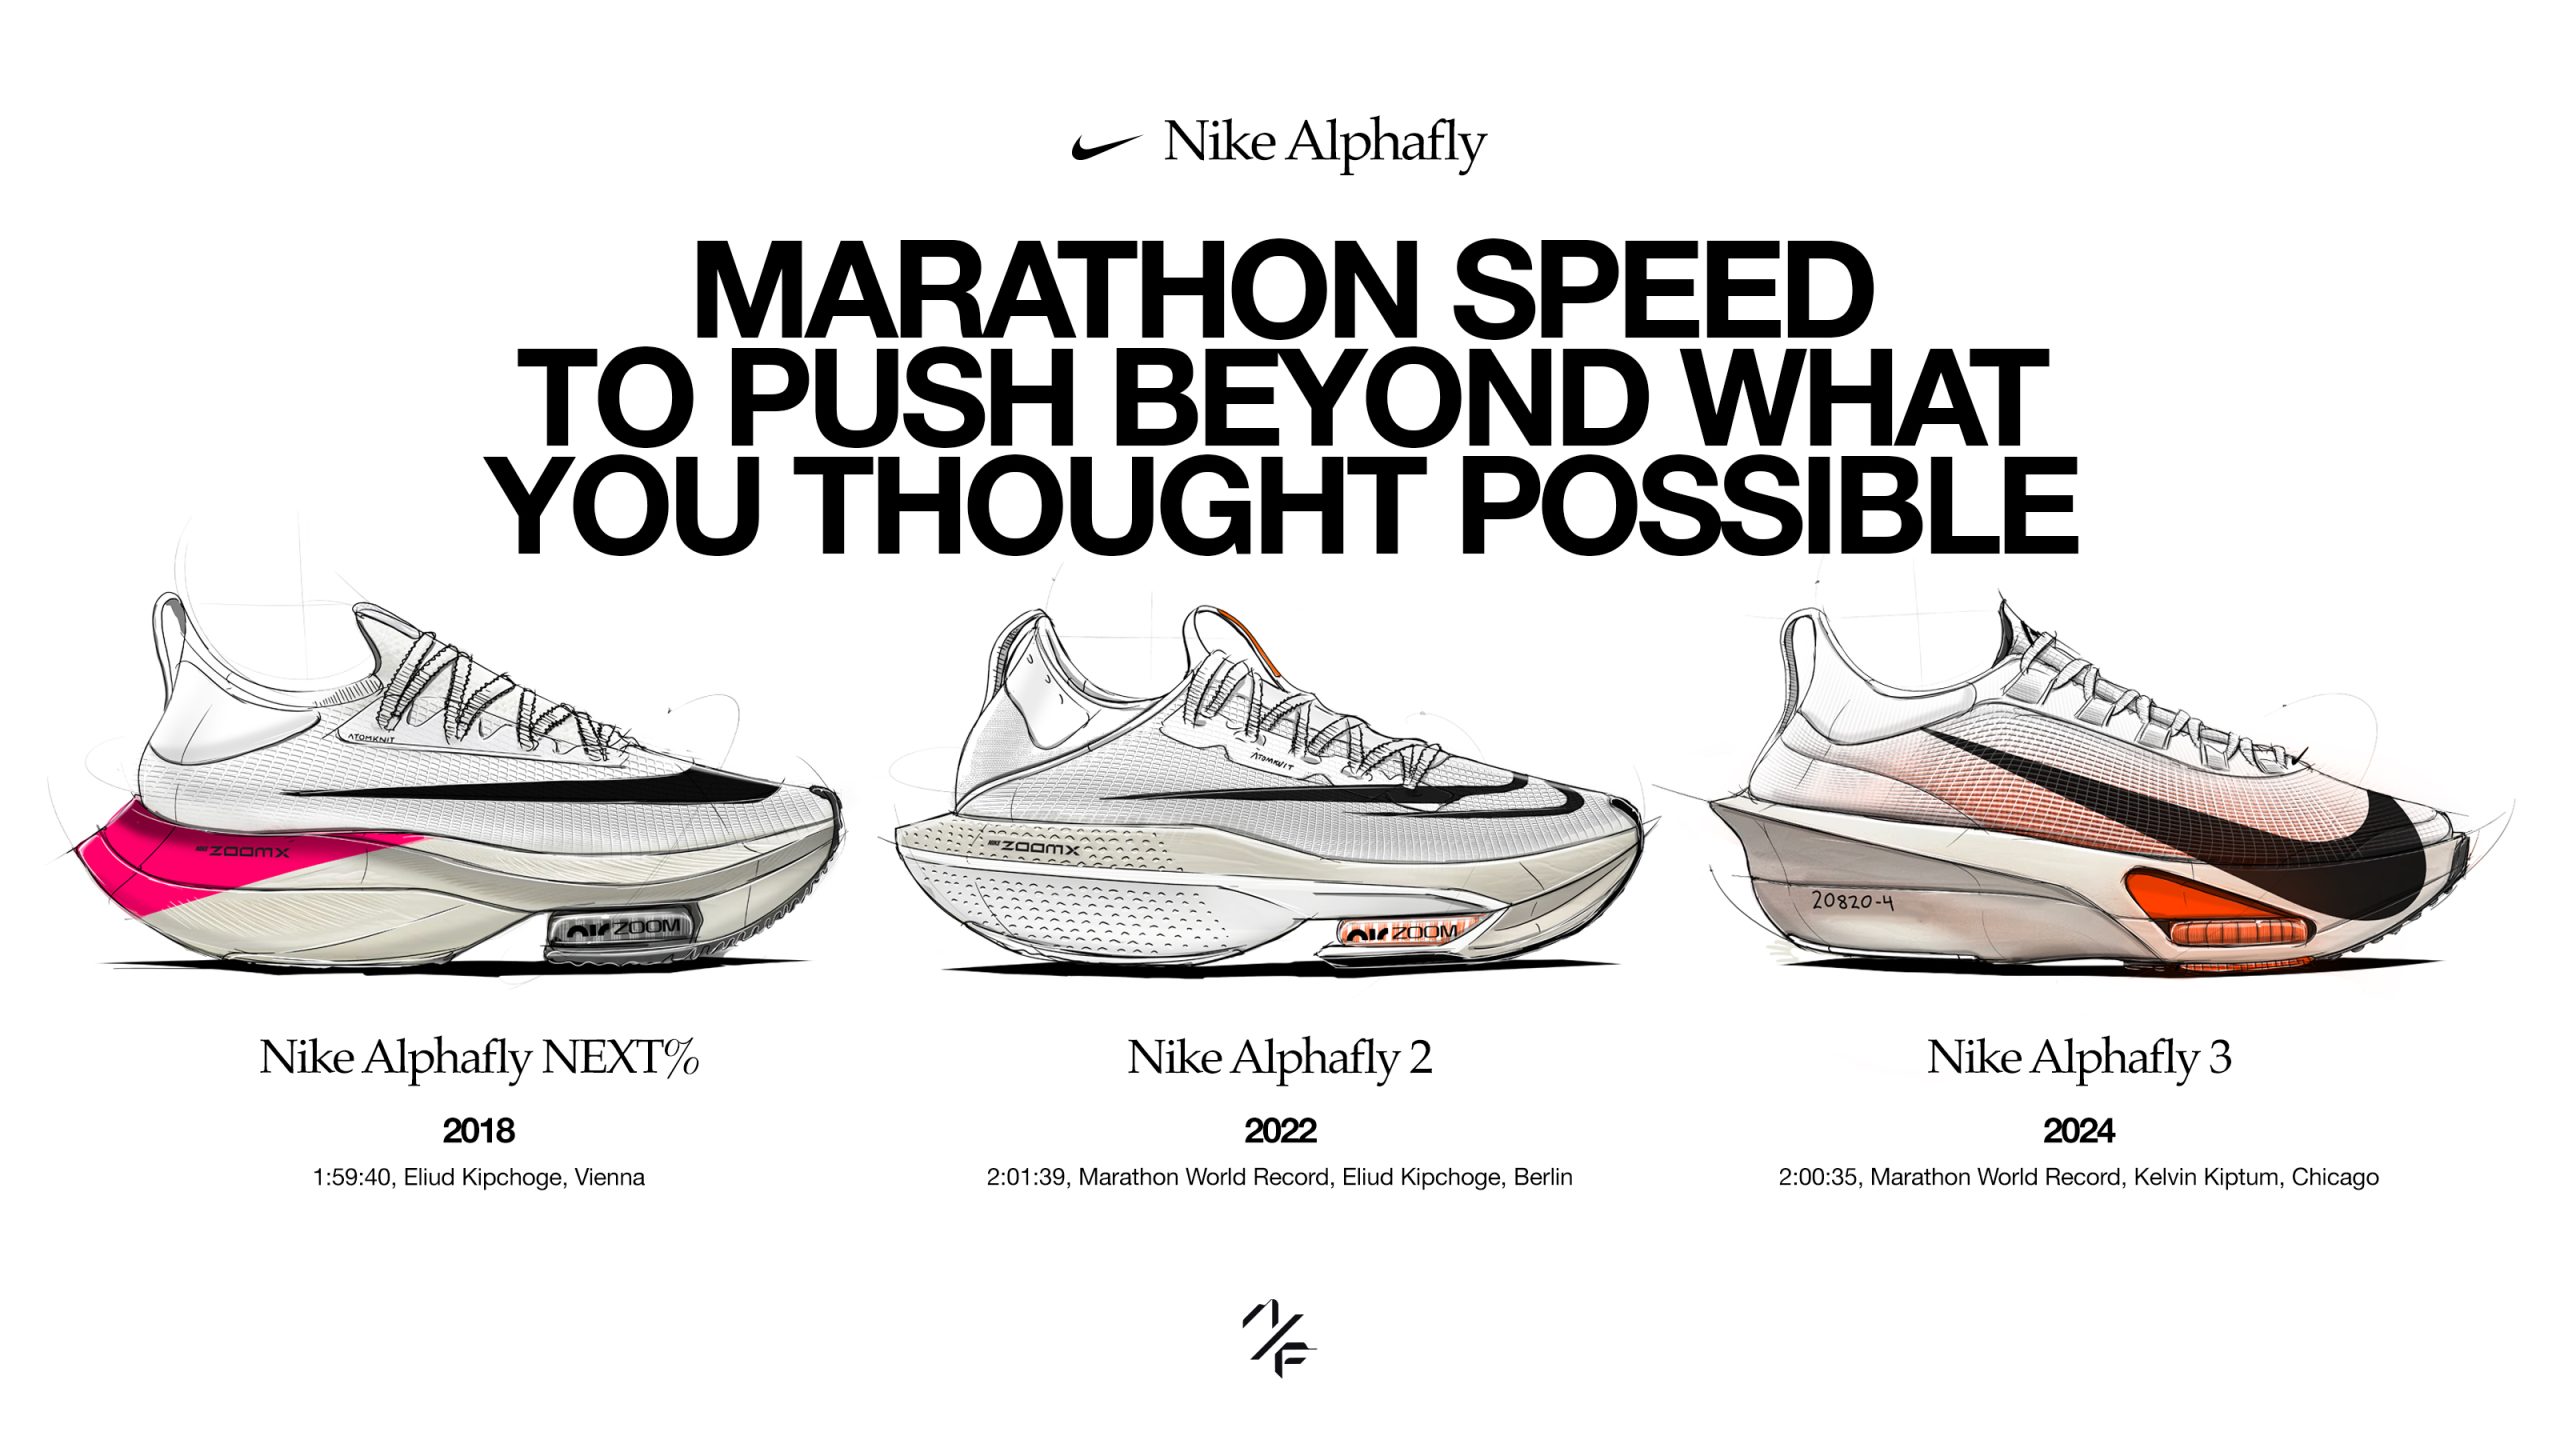 Nike Alphafly 3 - The Running Company - Running Shoe Specialists